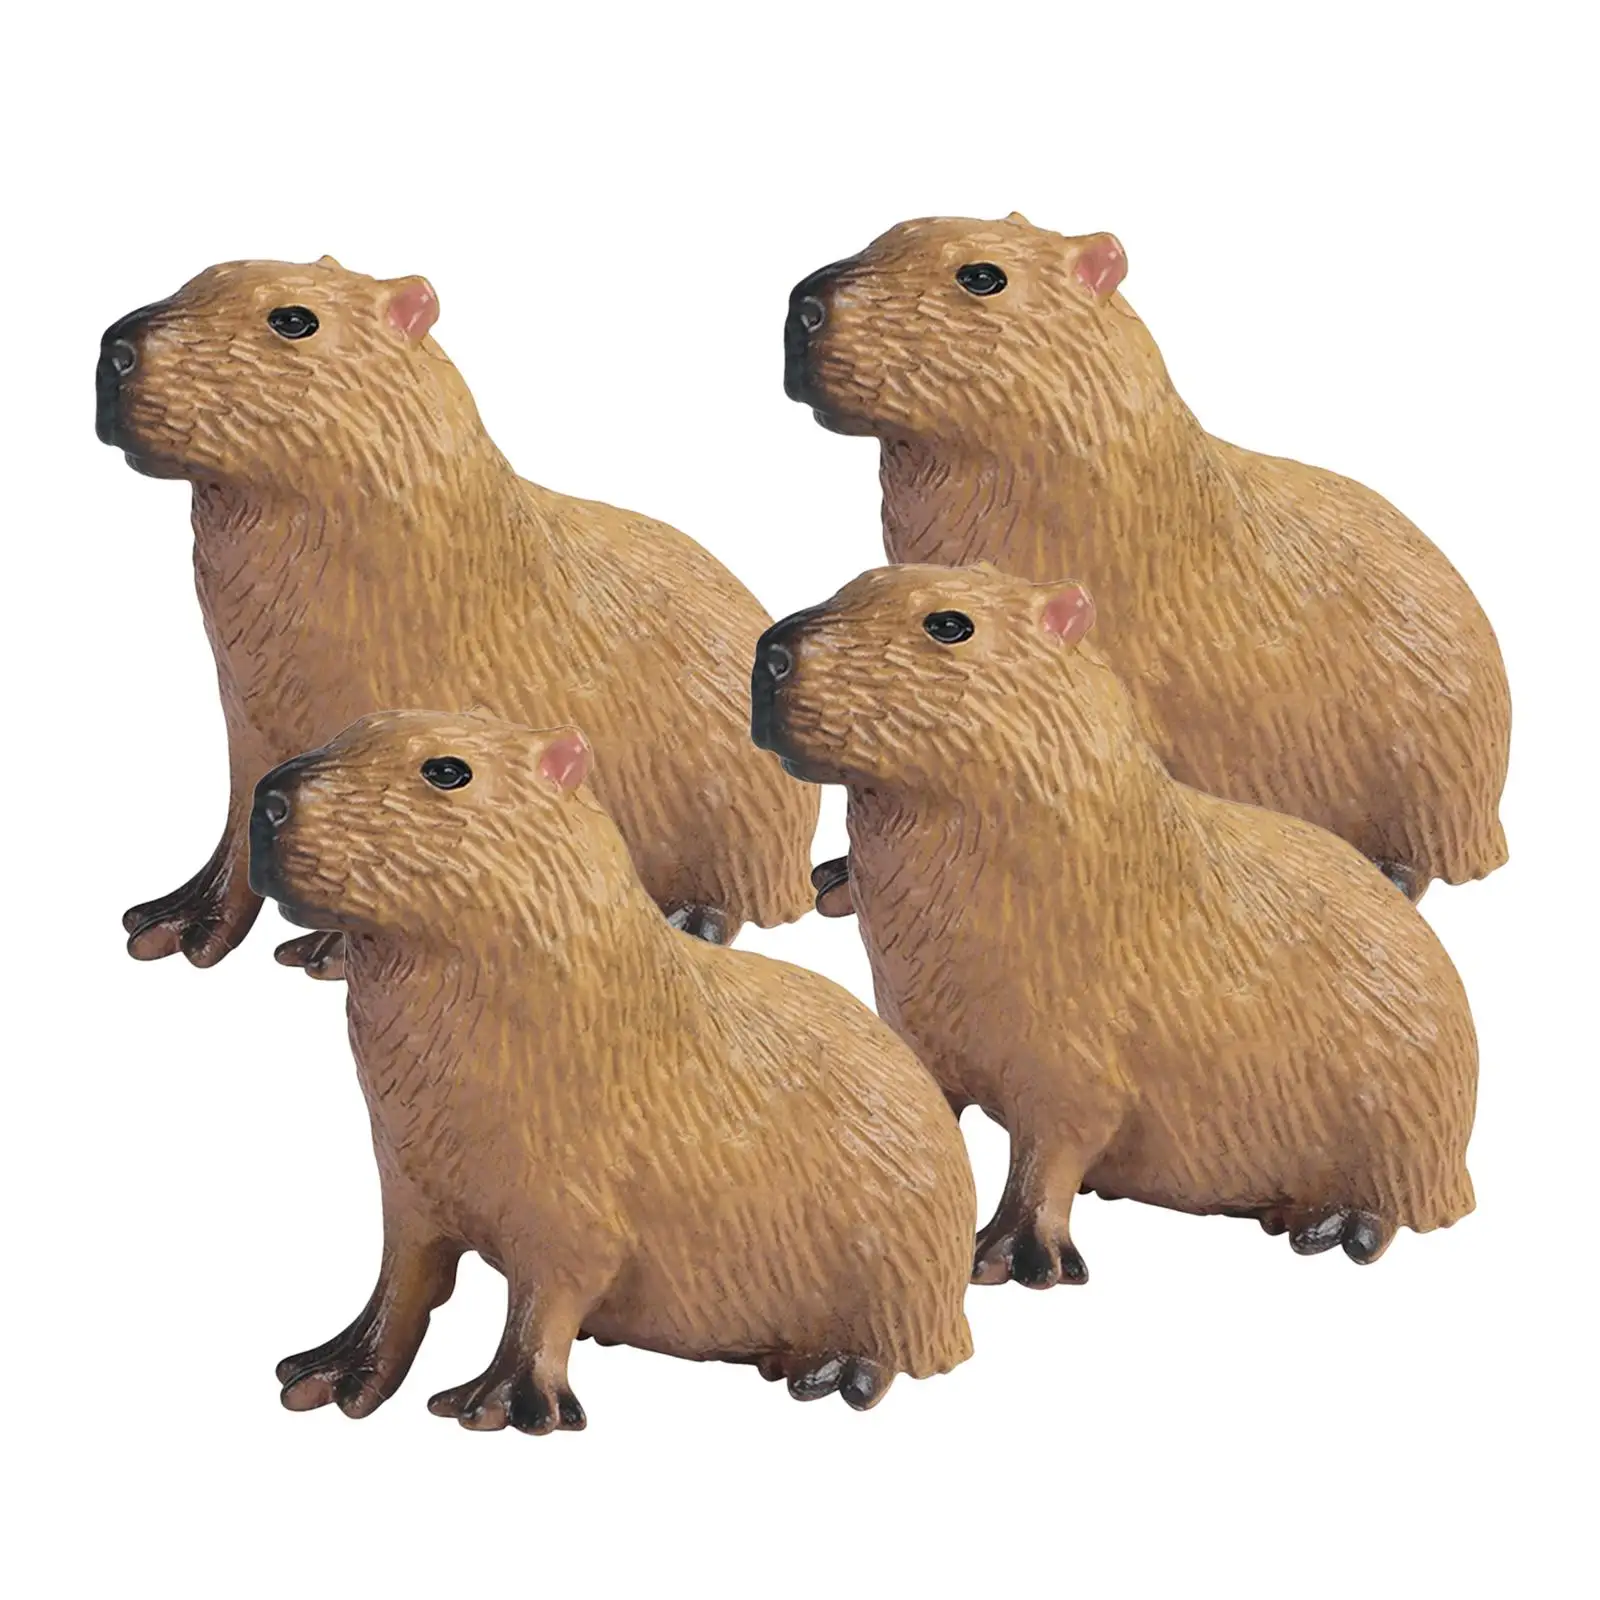 4x  Simulation Capybara Figurines Kids Playset Collection Toy Office Living Room Decor Crafts